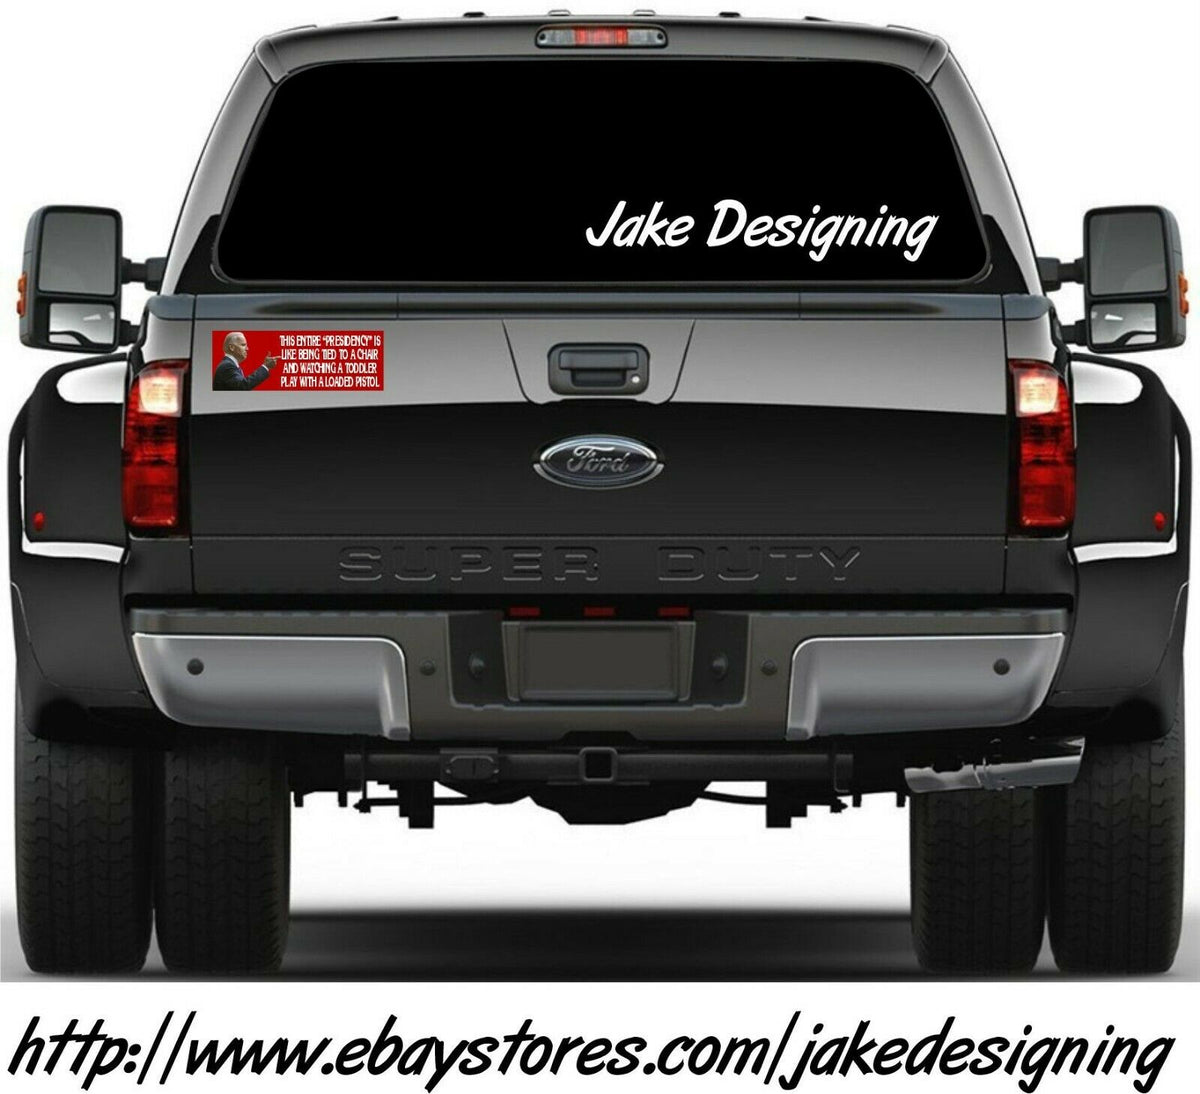 Anti Biden Bumper Sticker Playing with a loaded pistol - Powercall Sirens LLC